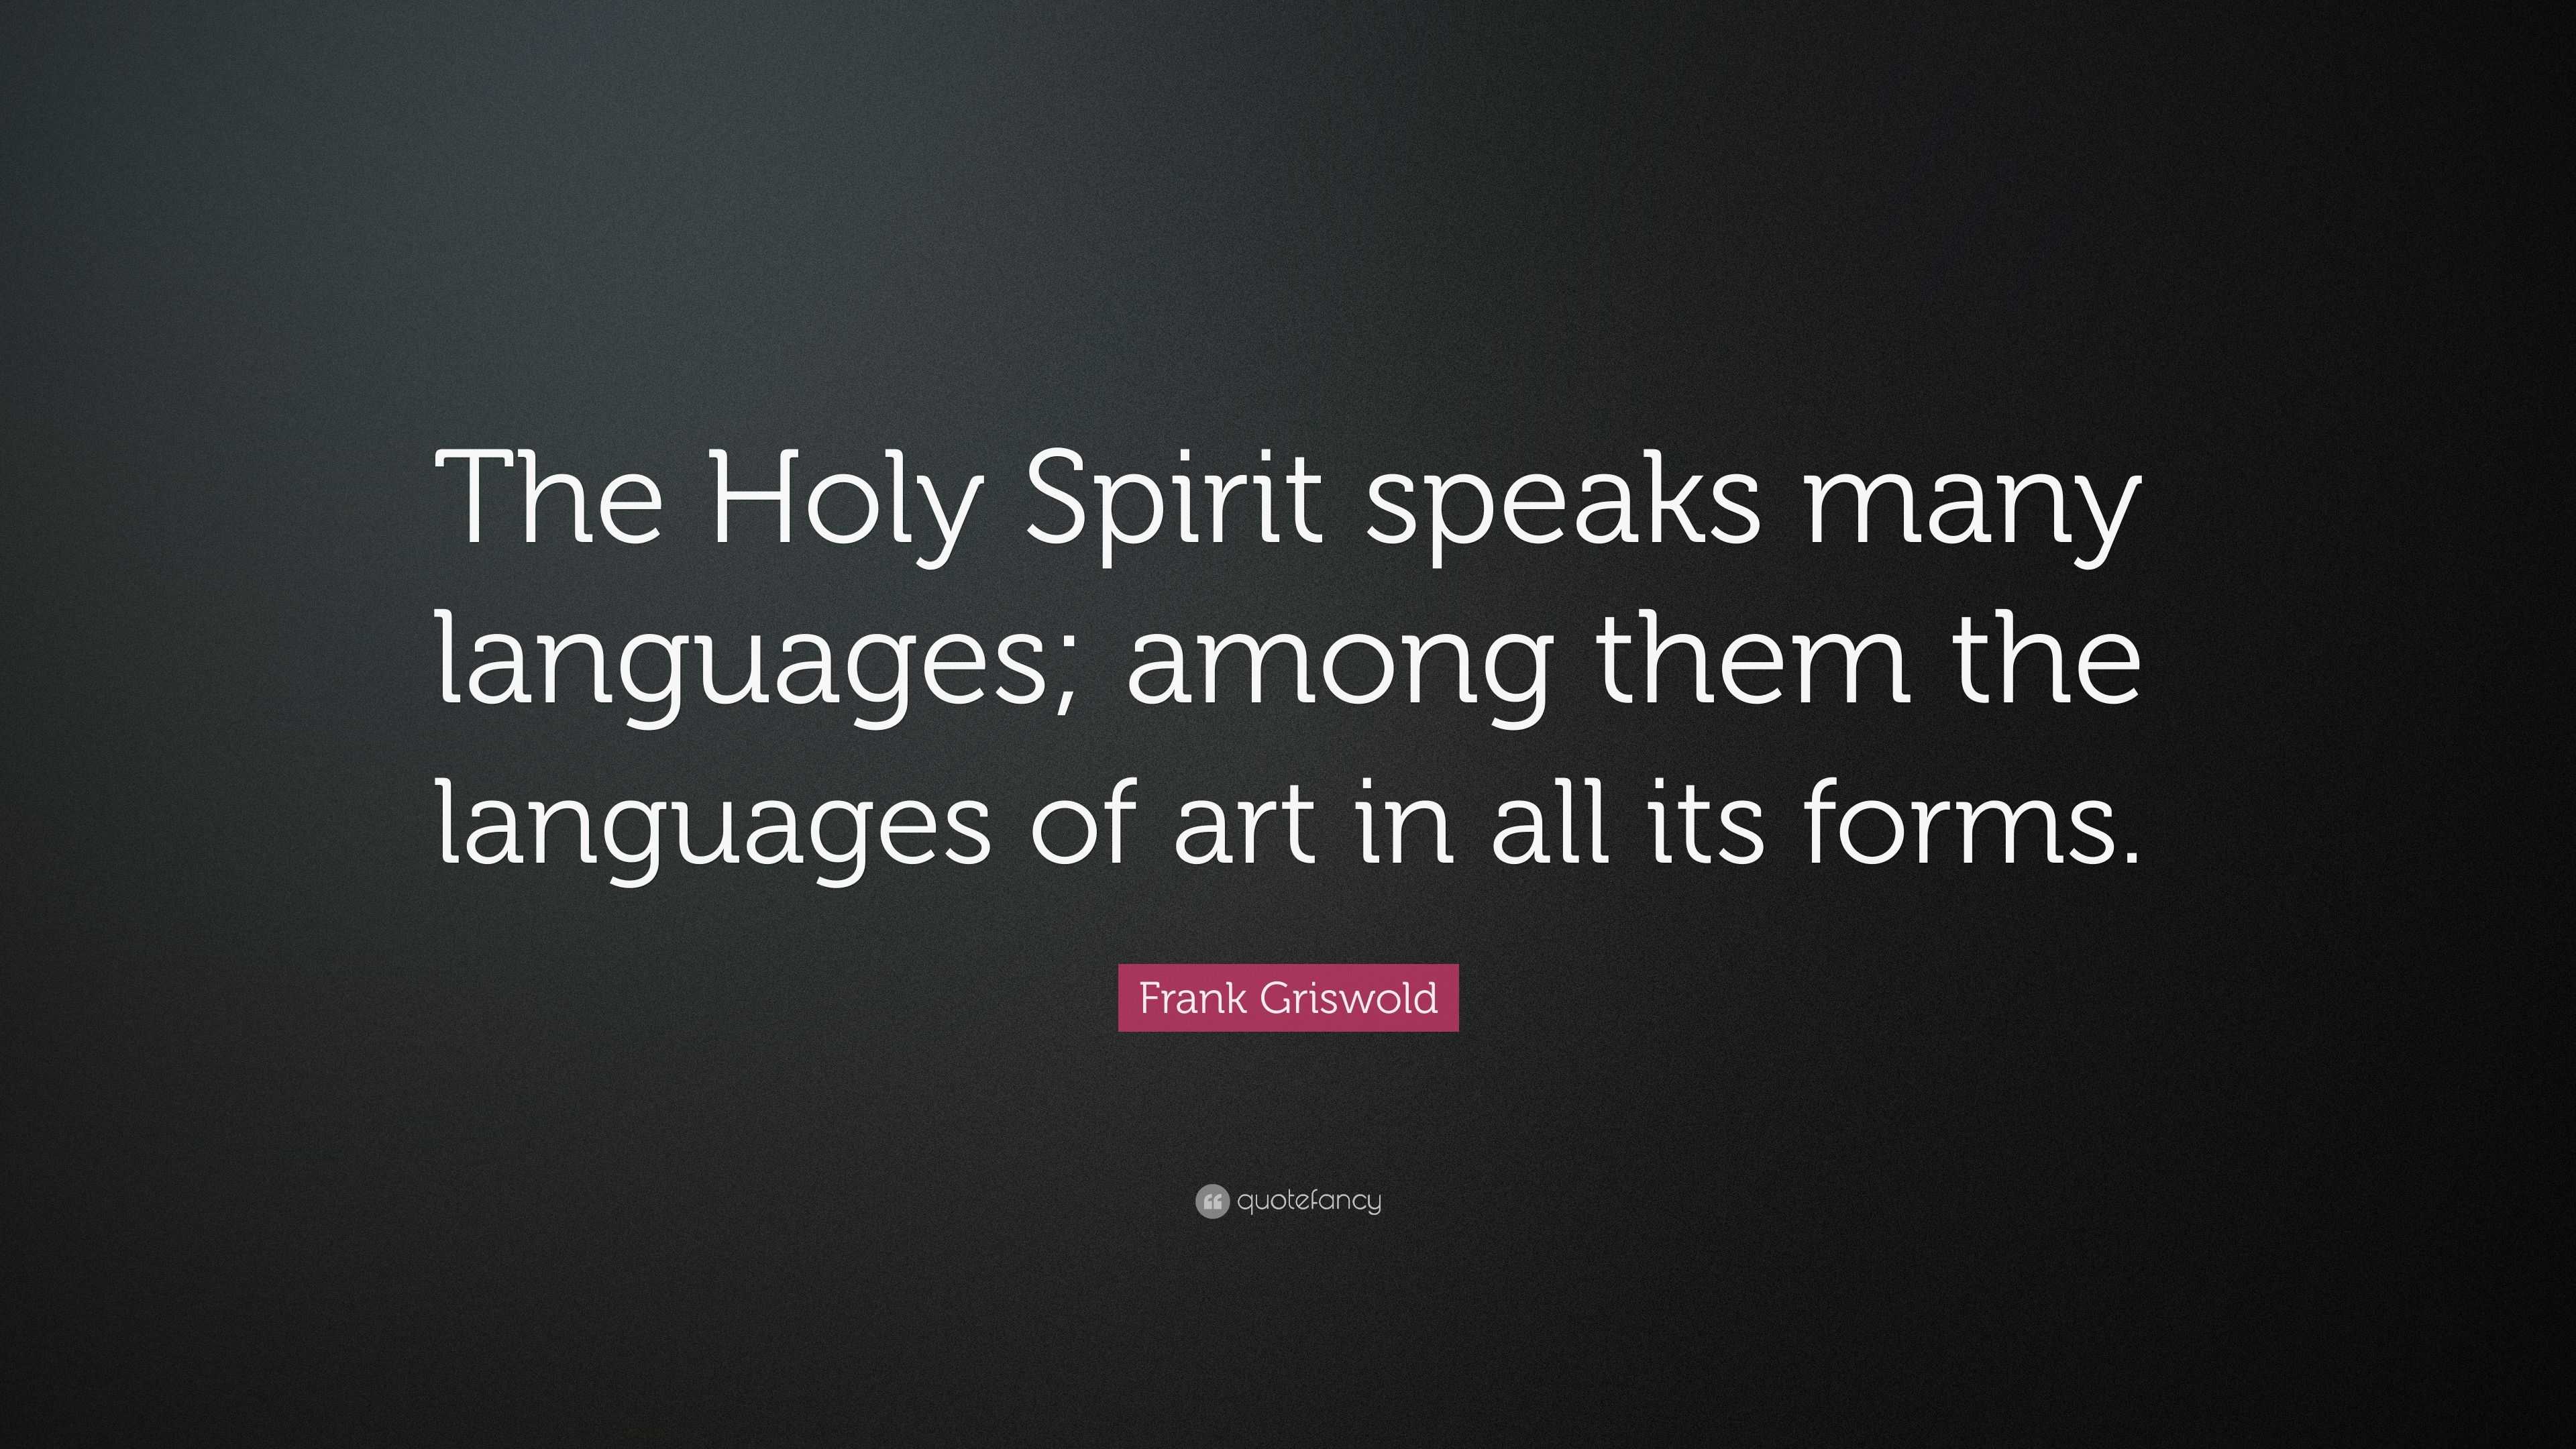 Frank Griswold Quote: “The Holy Spirit speaks many languages; among ...